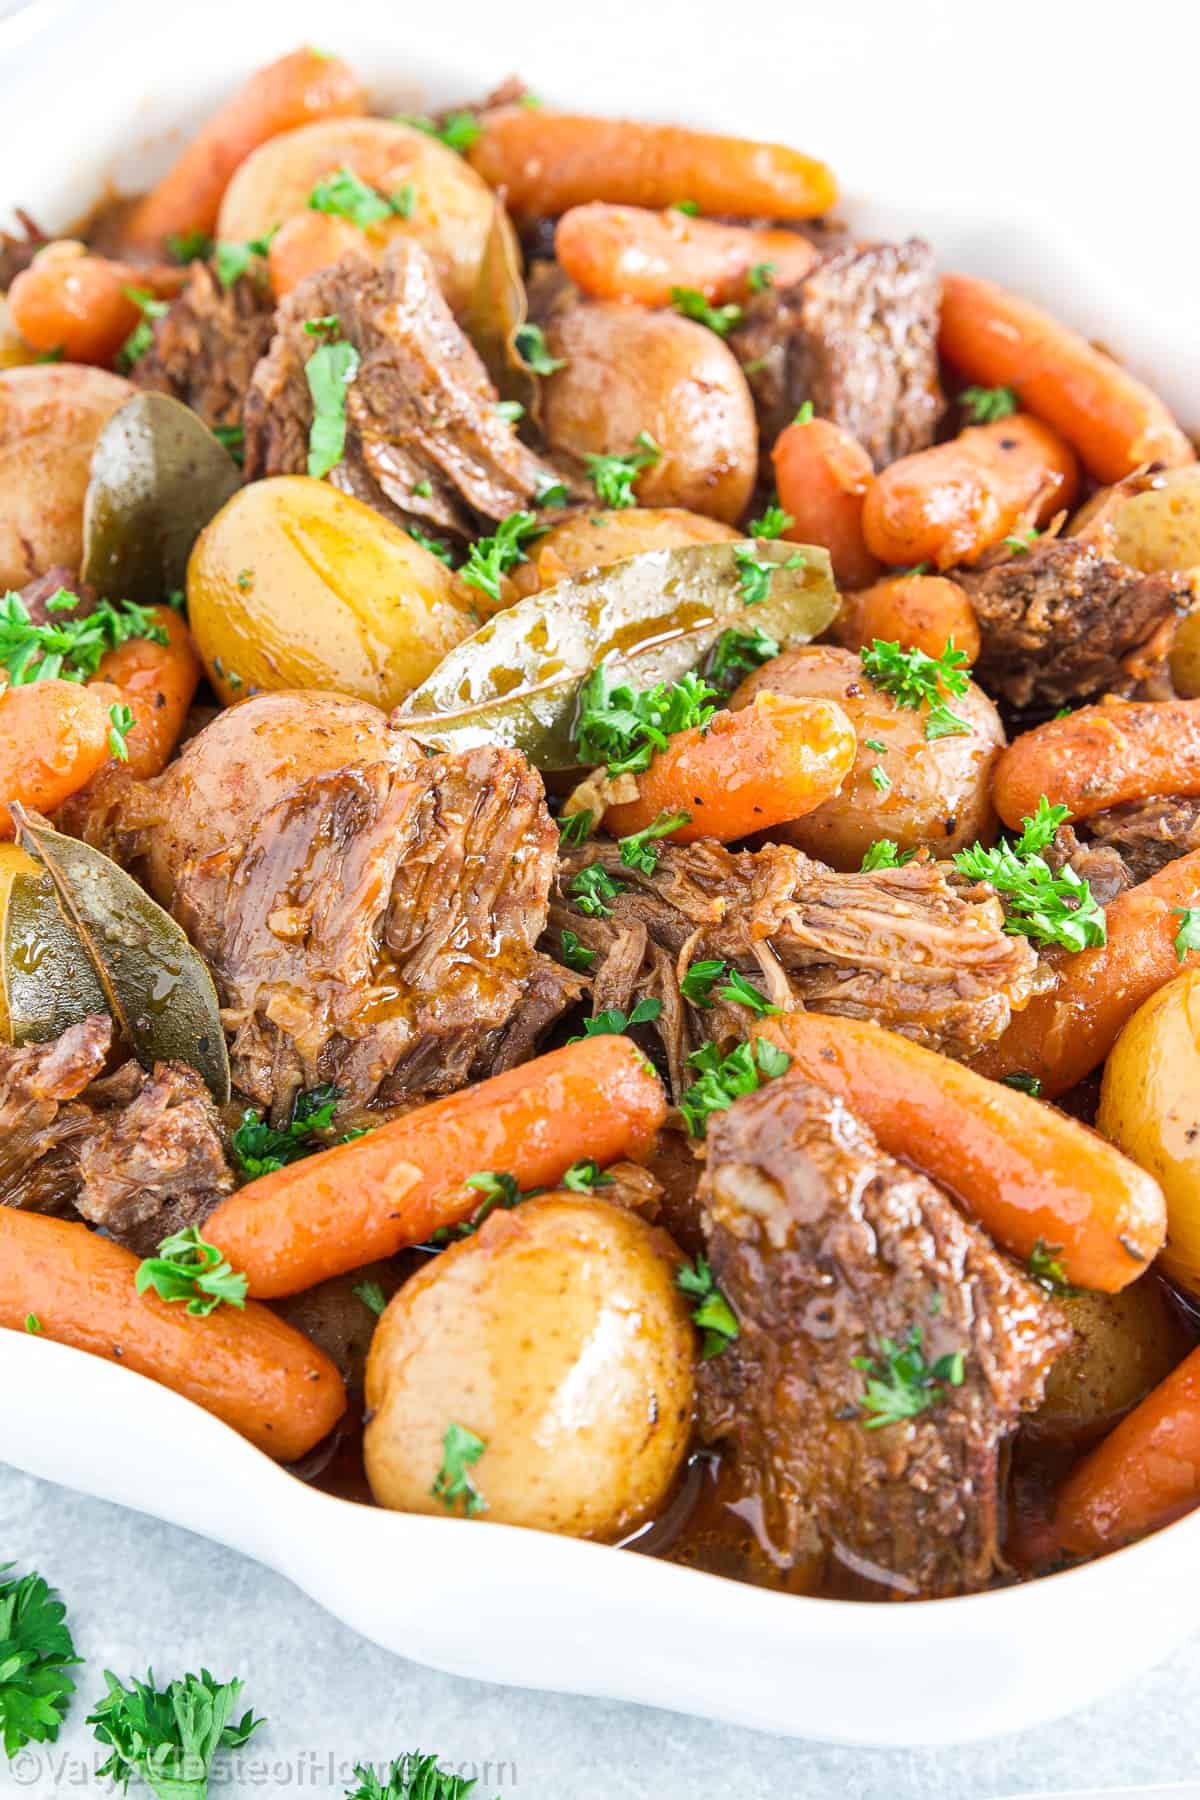 The pressure cooking technique guarantees a tender and flavorful roast that's ready in just over an hour, making it an ideal choice for a family Sunday dinner or even a festive holiday meal.